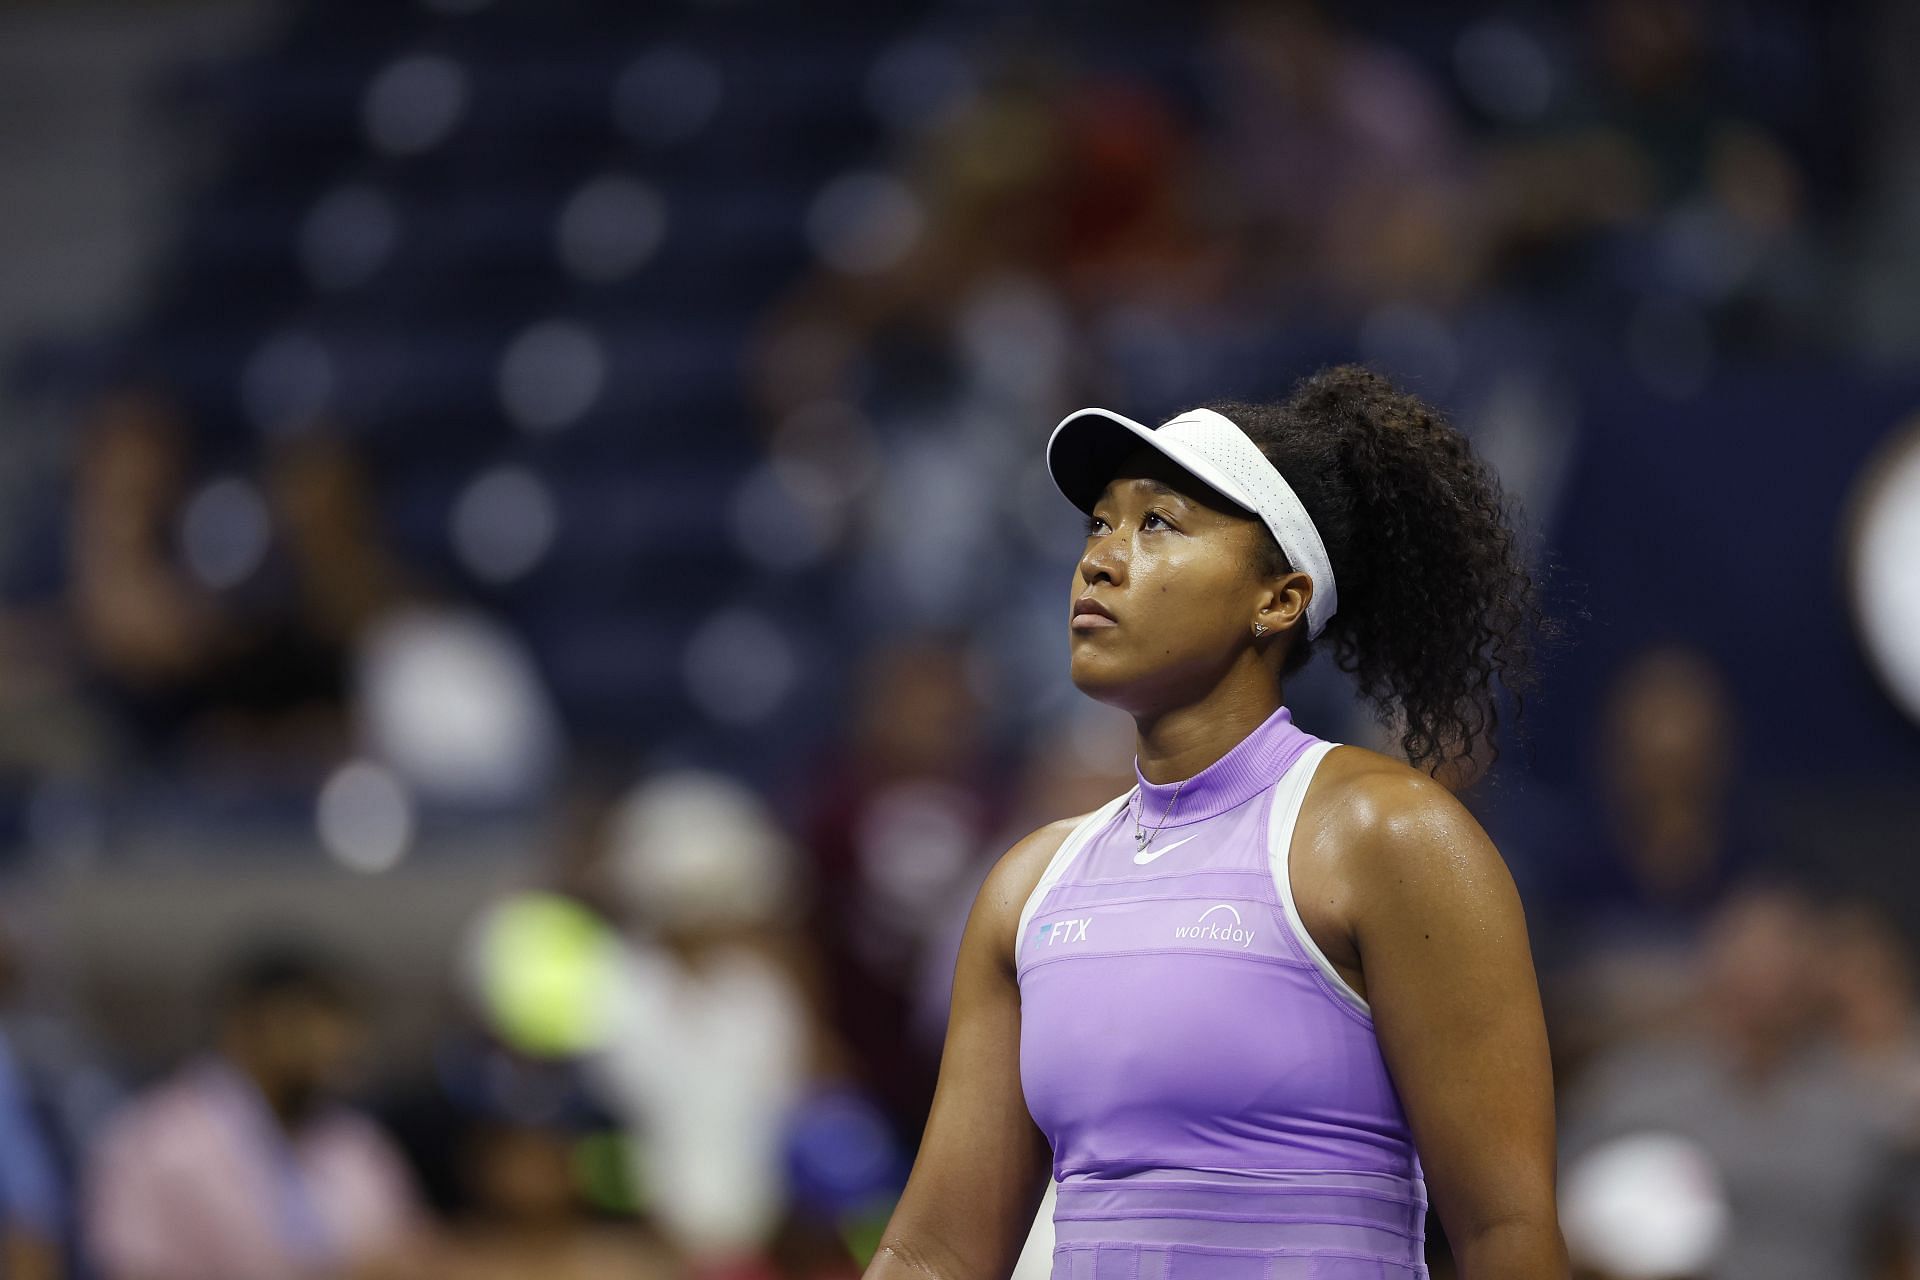 Naomi Osaka during her US Open match against Danielle Collins